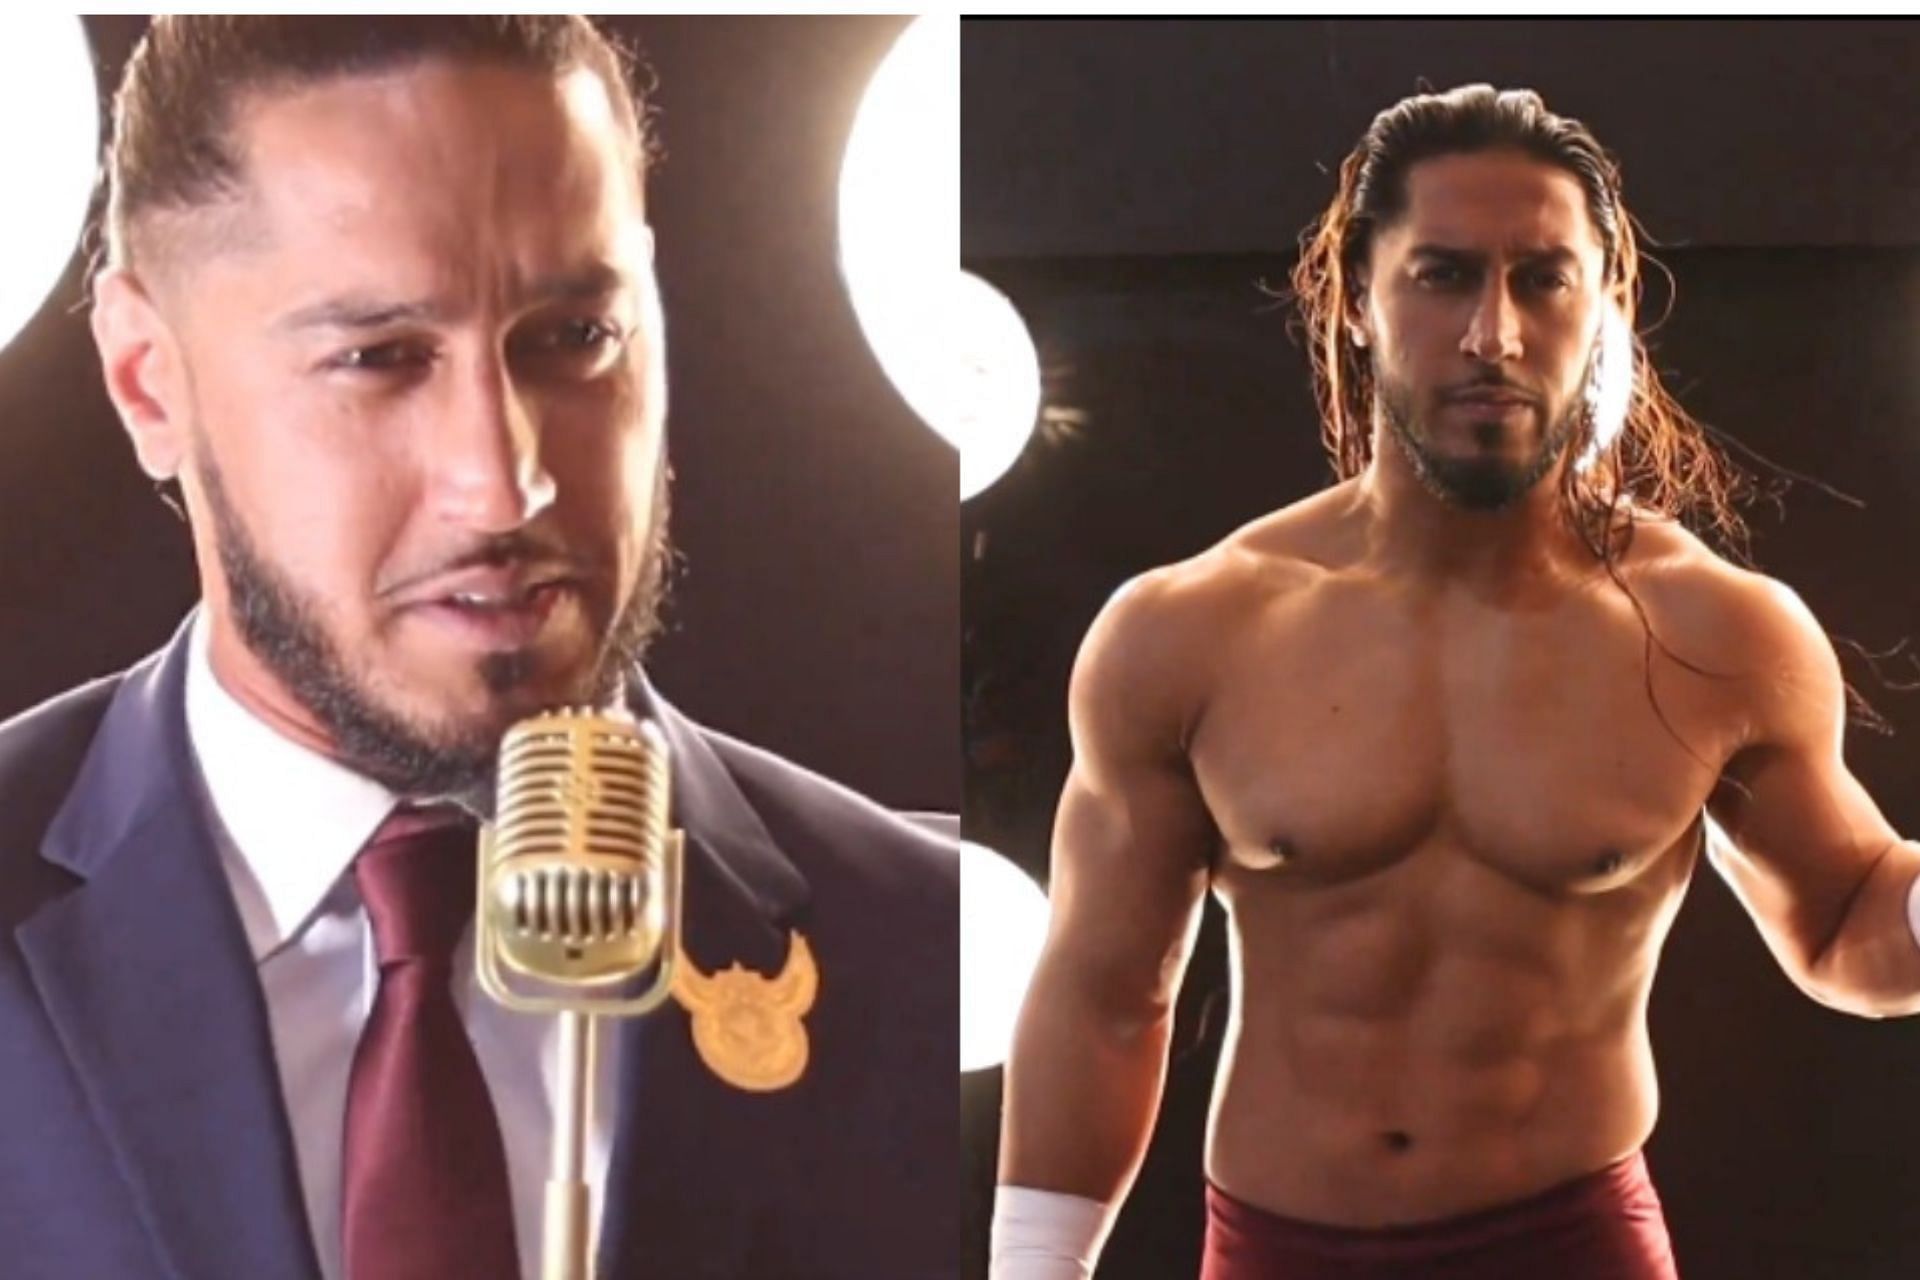 An AEW wrestler wants to have a bout with ex-WWE wrestler Mustafa Ali